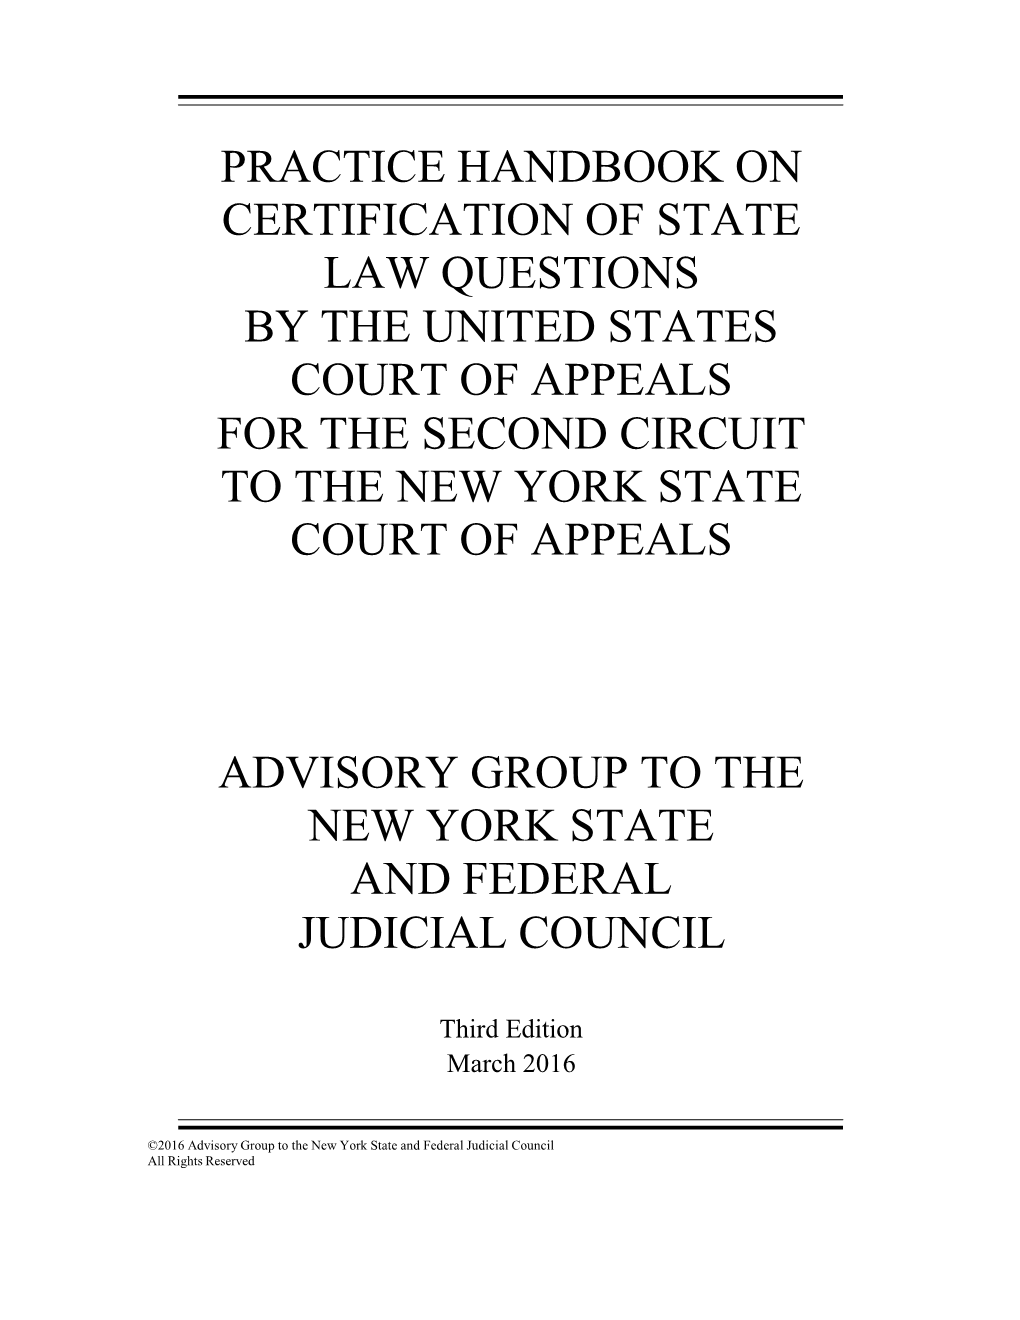 Certification of State Law Questions by the United States Court of Appeals for the Second Circuit to the New York State Court of Appeals